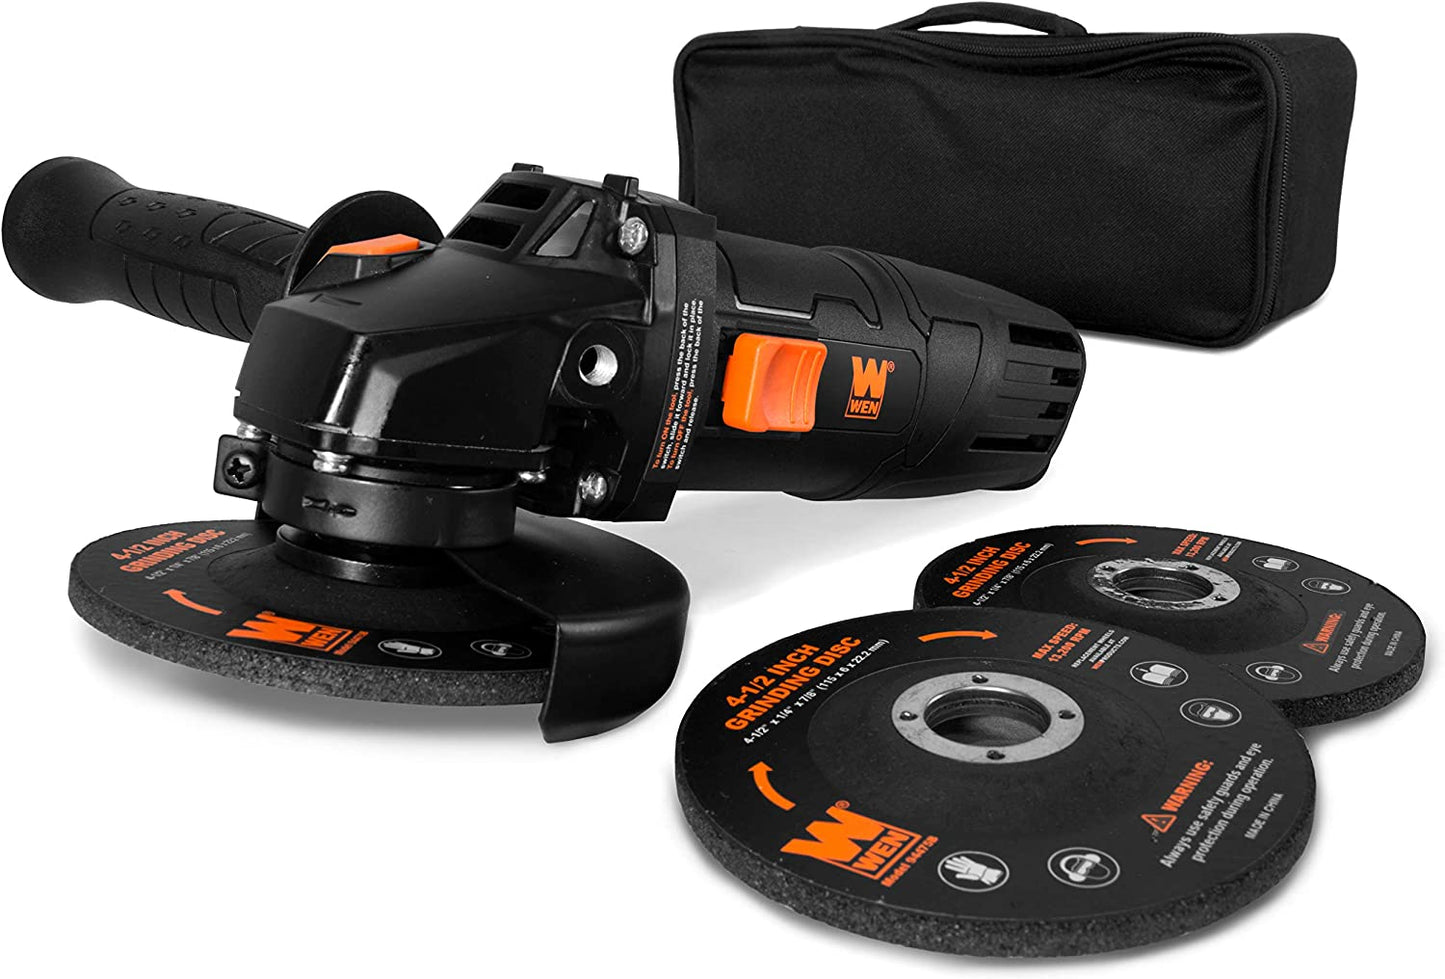 7.5-Amp 4-1/2-Inch Angle Grinder with Reversible Handle, Three Grinding Discs, and Carrying Case